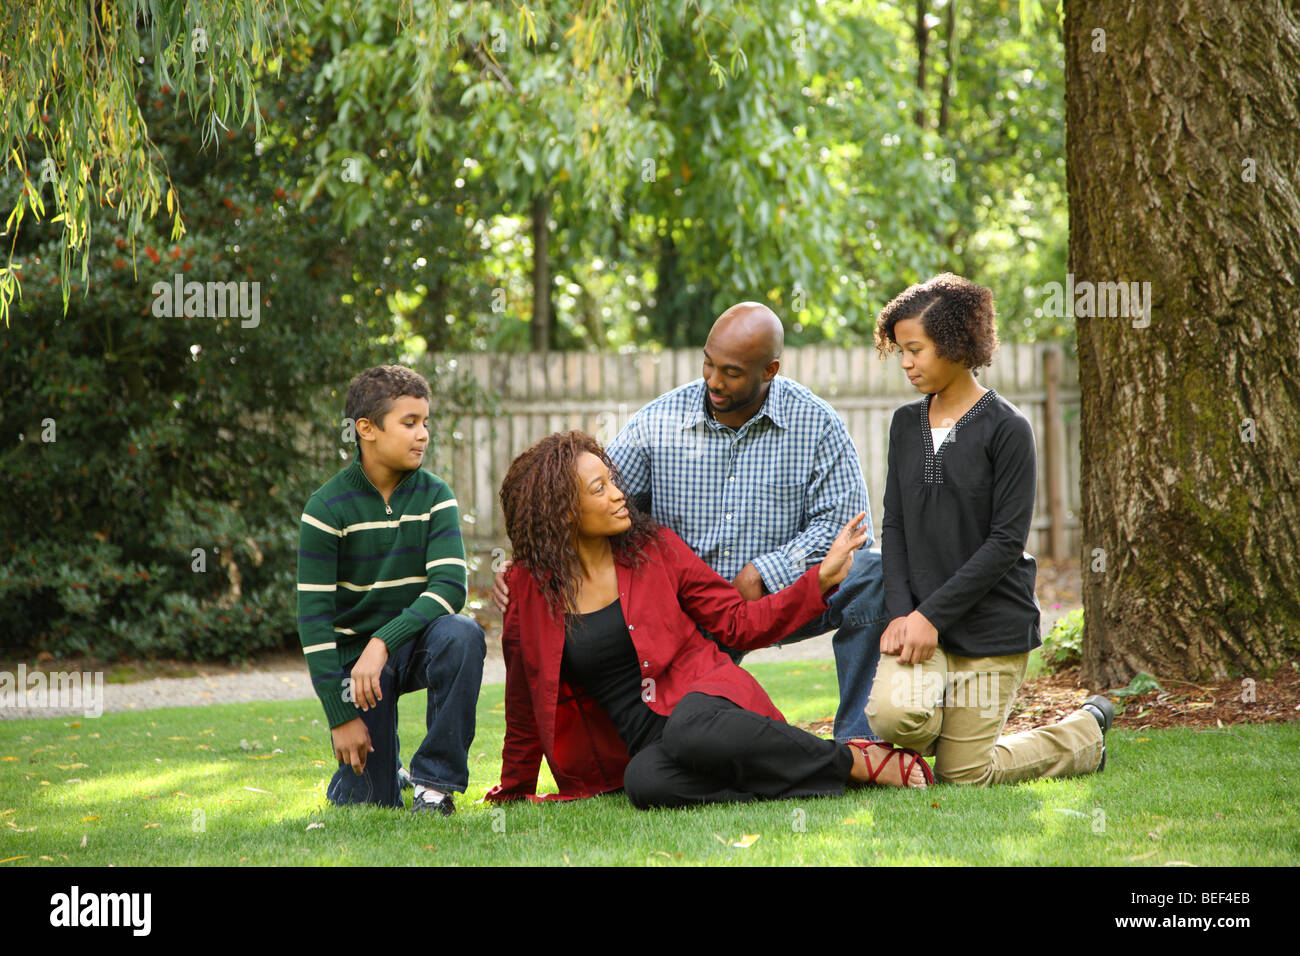 African American family outdoors Banque D'Images